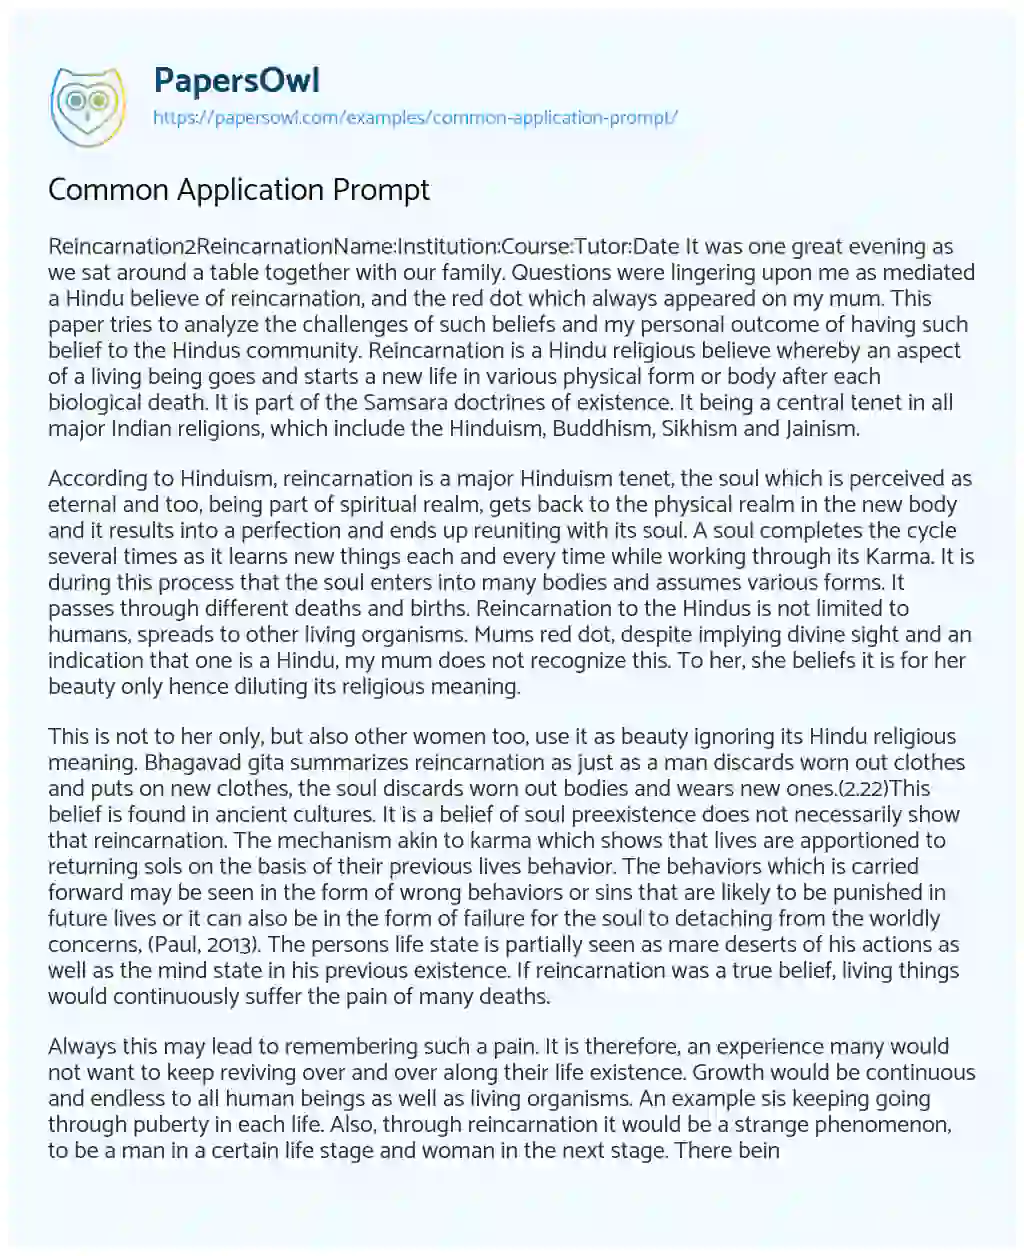 Essay on Common Application Prompt